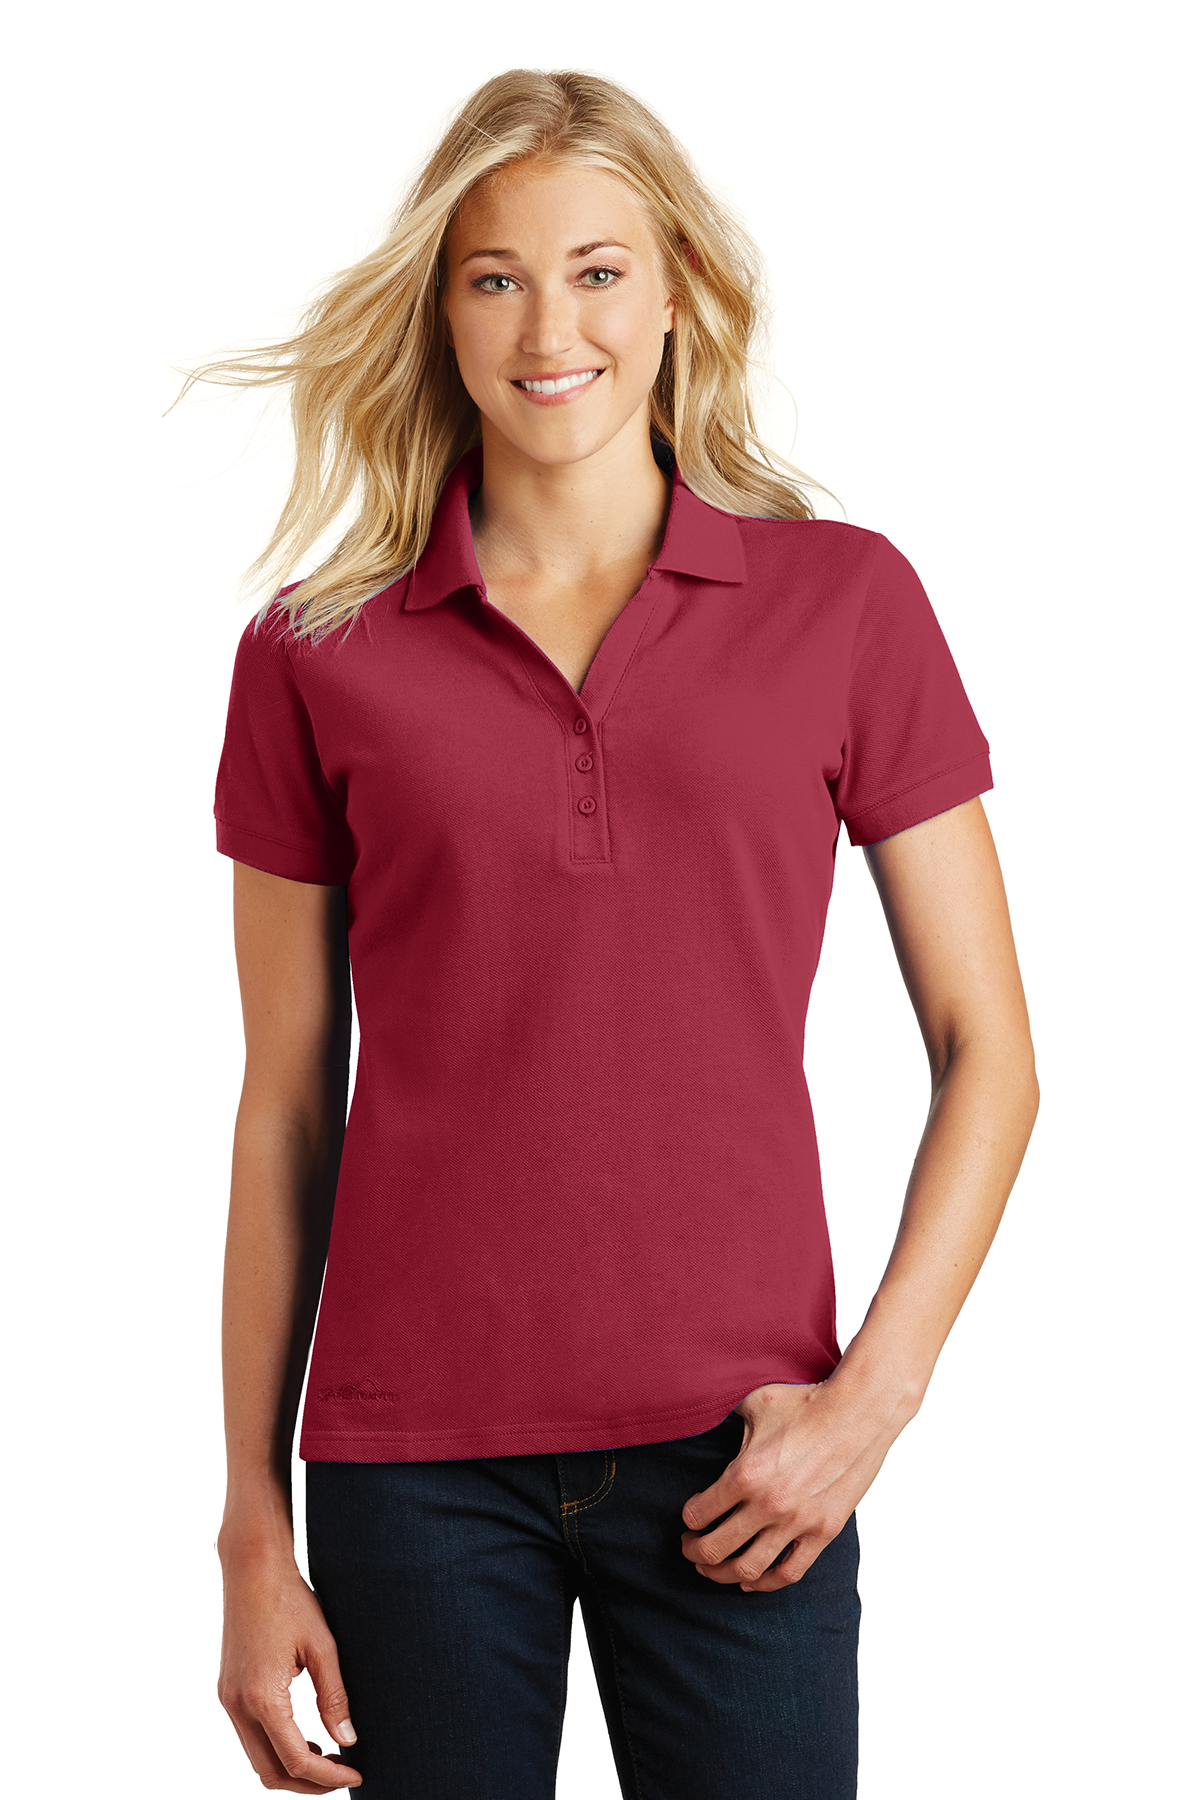 Eddie Bauer Girls Short Sleeve Jersey Polo Shirt More Styles Available 